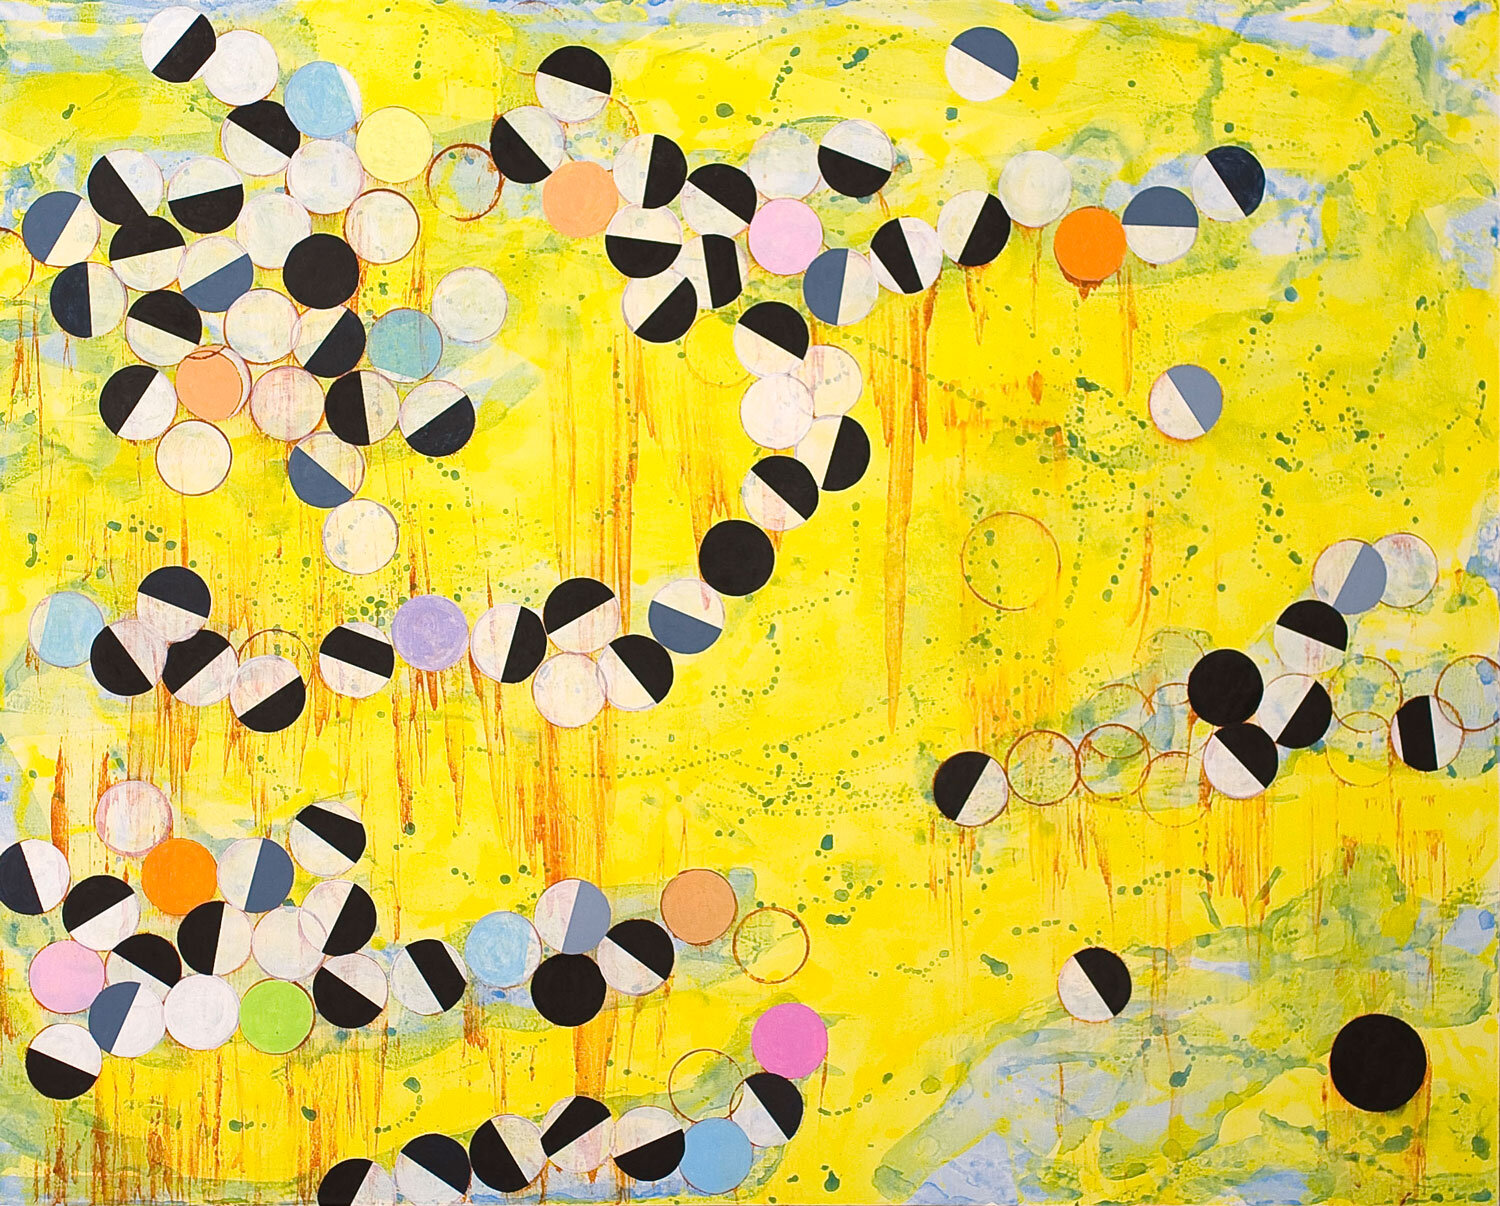   Of Polarities Waves and Half Moons , 2009, acrylic on canvas, 48 x 60 inches 